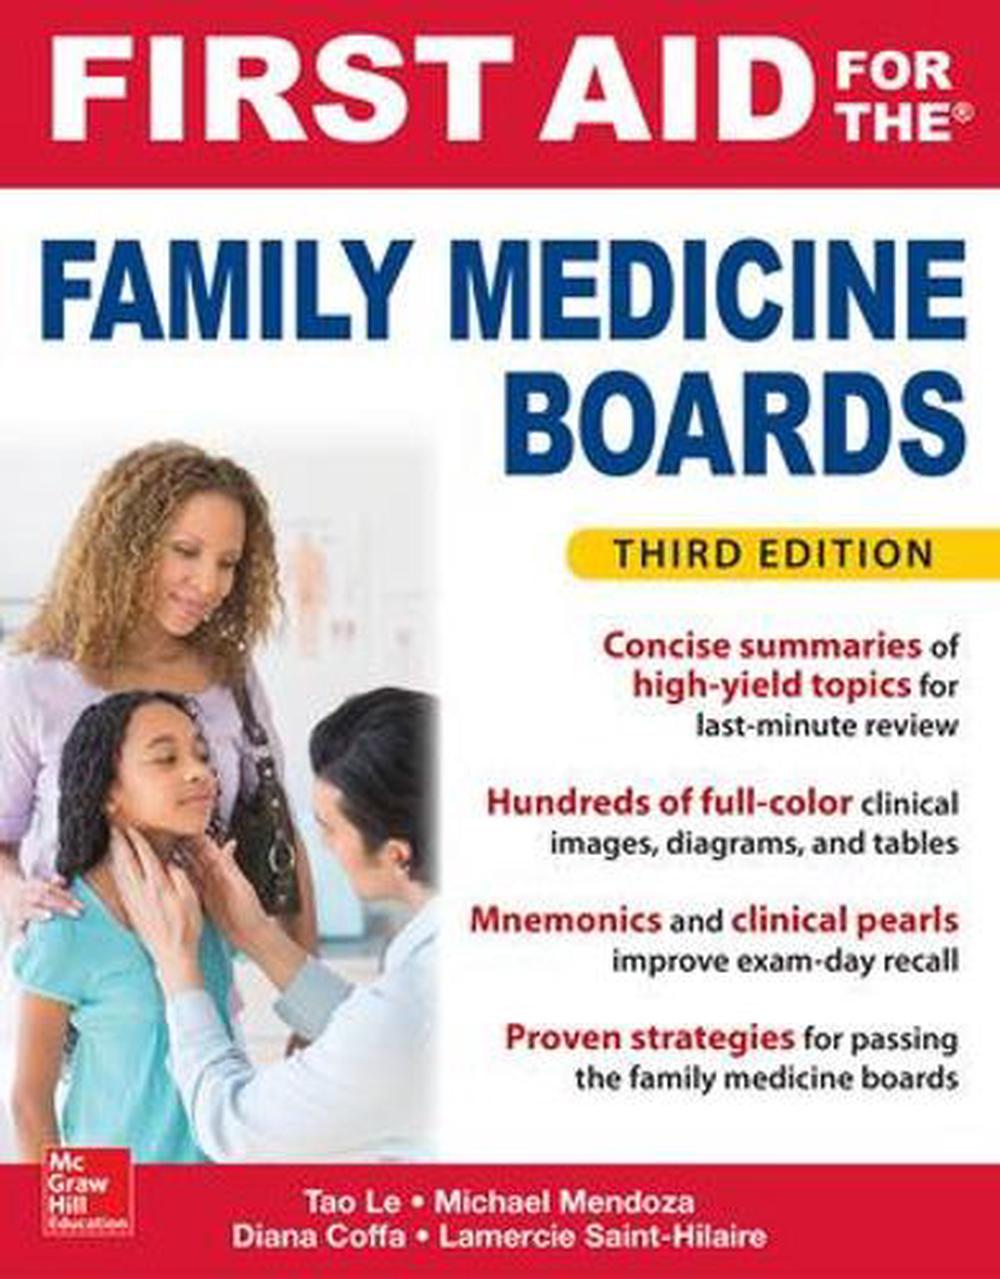 First Aid for the Family Medicine Boards, Third Edition by Tao Le